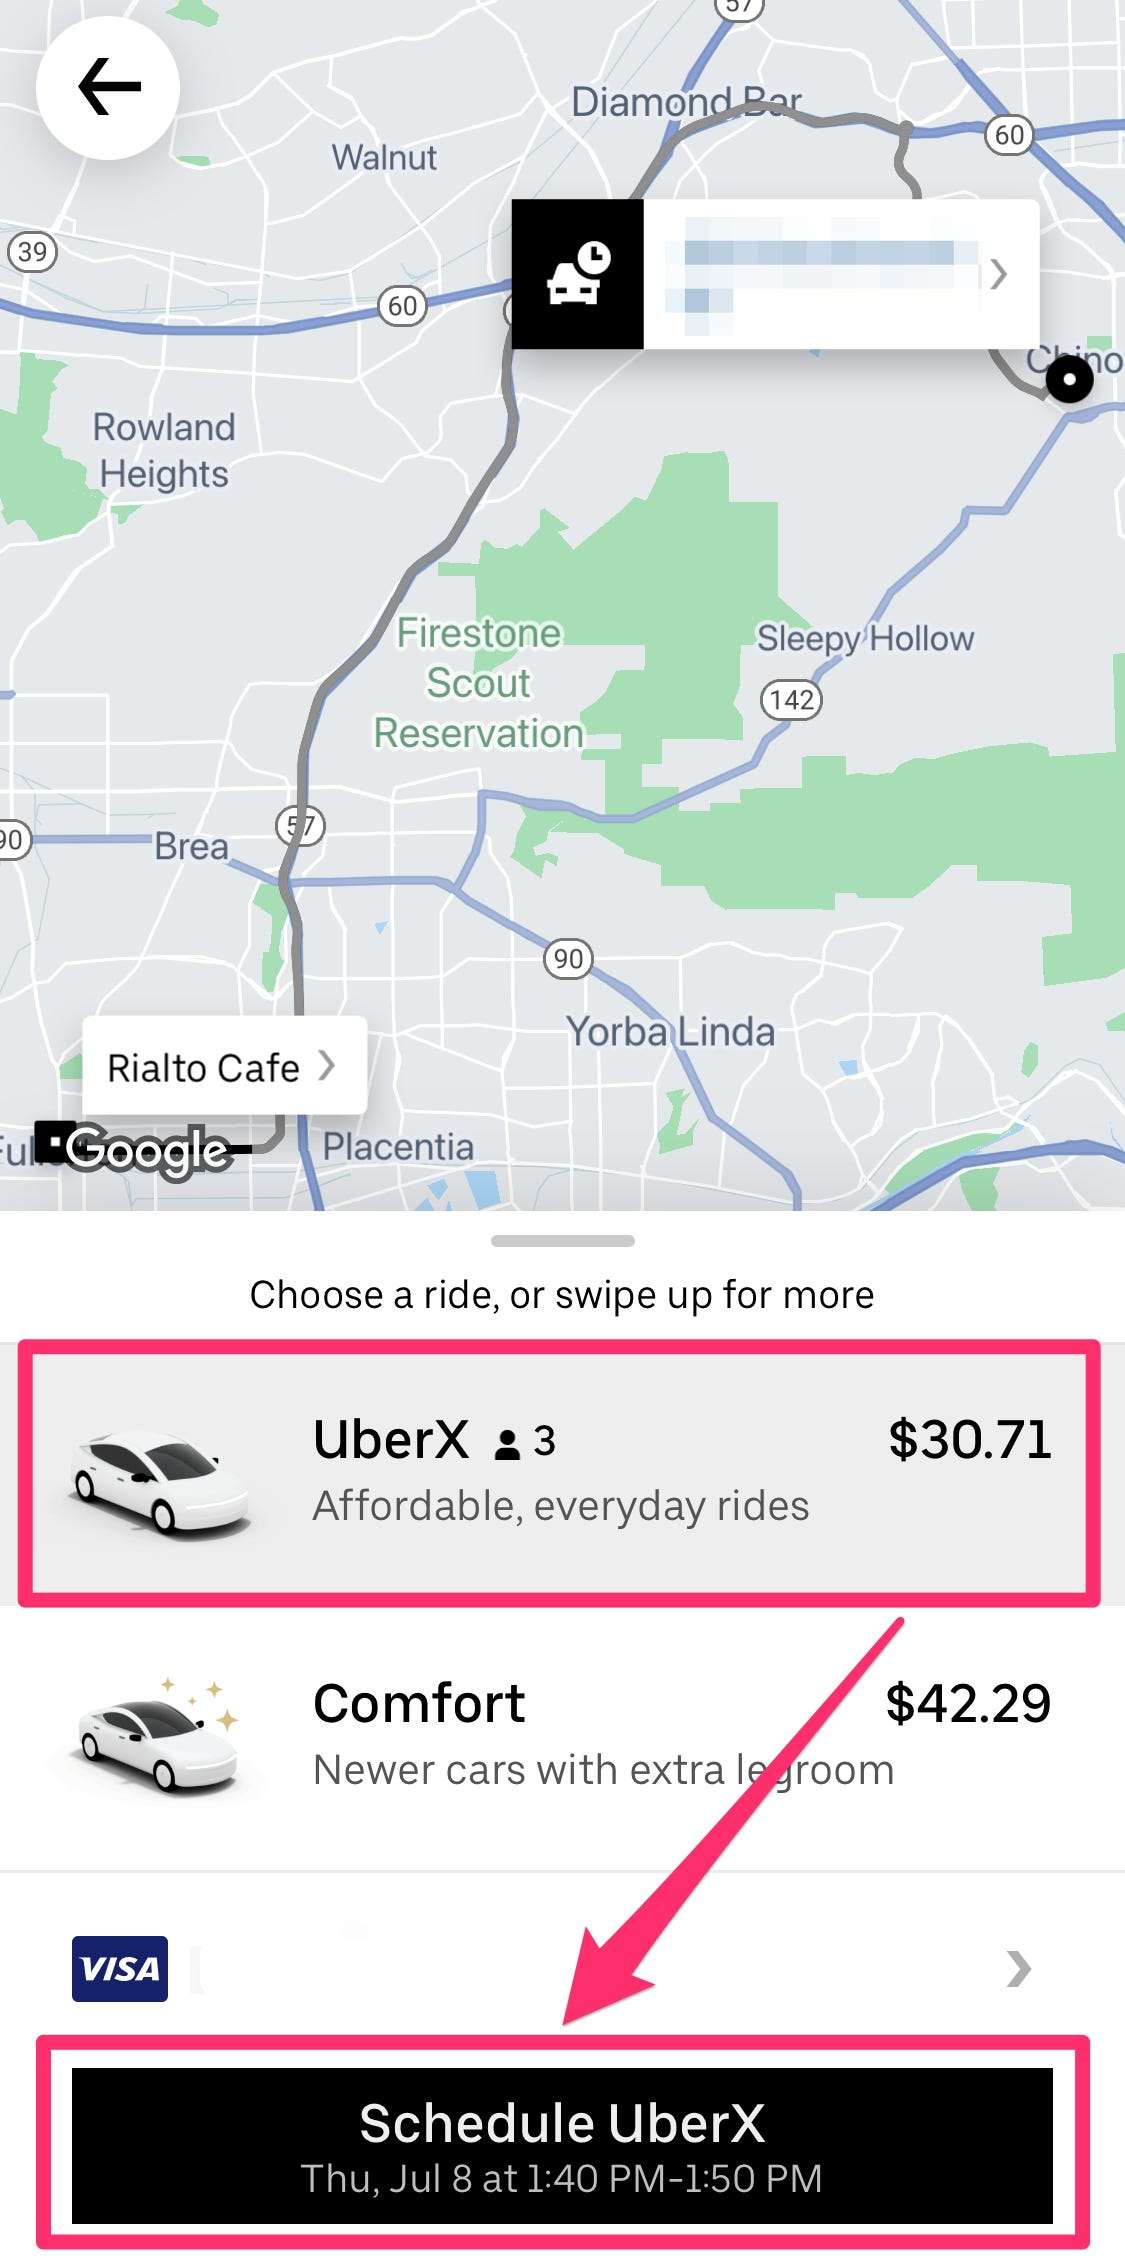 How to schedule an Uber ride in advance, or cancel a scheduled ride if